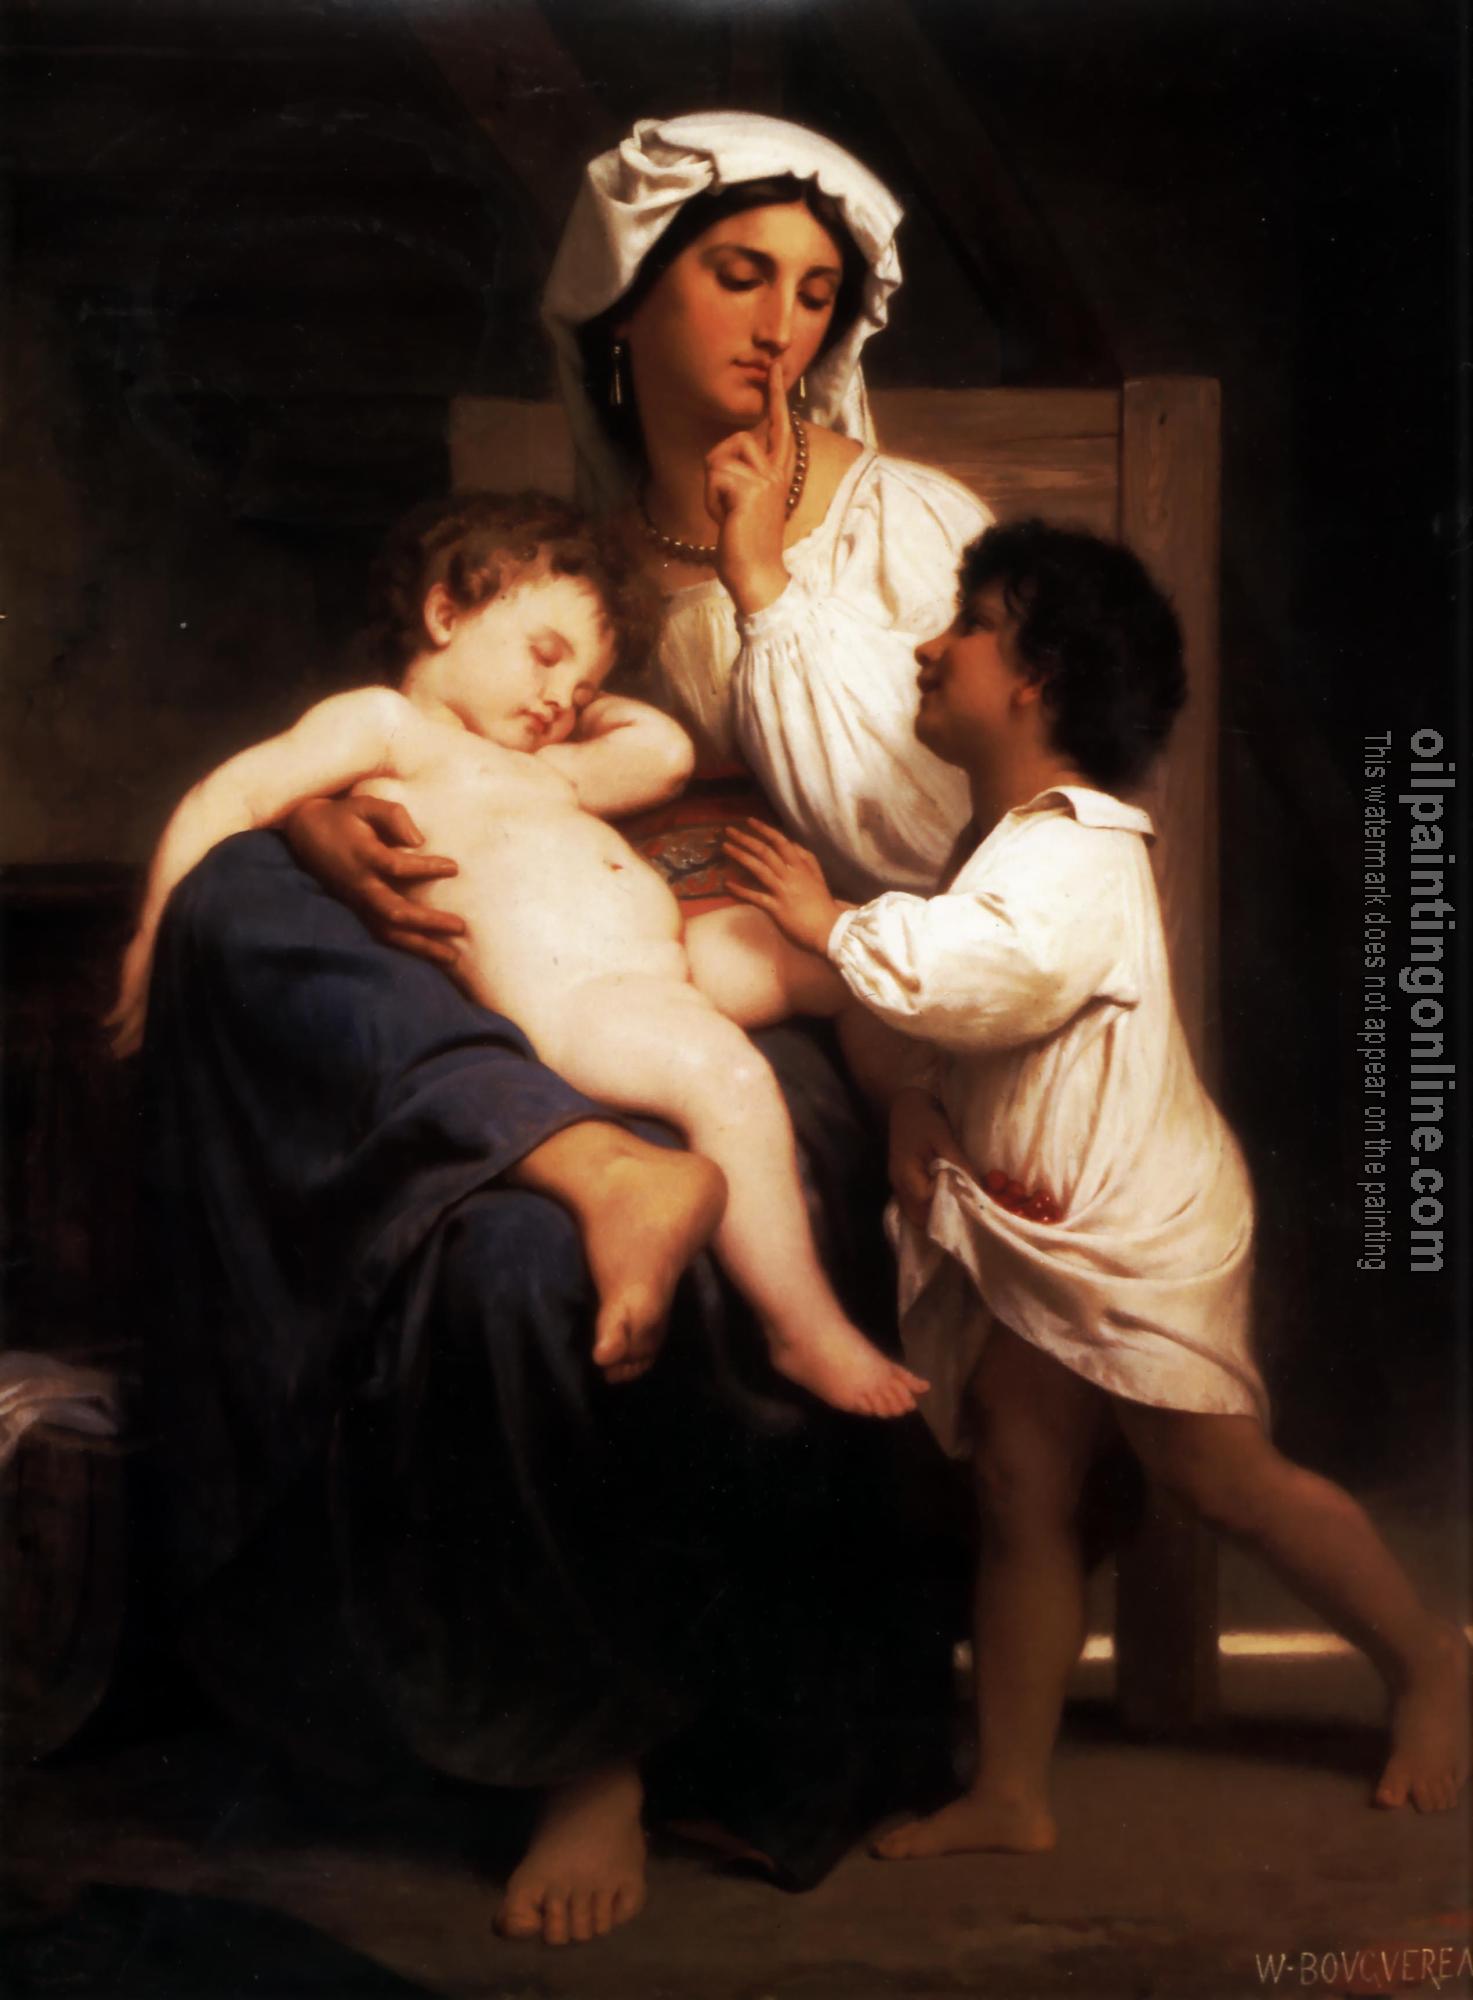 Bouguereau, William-Adolphe - Le sommeil( Asleep at last)